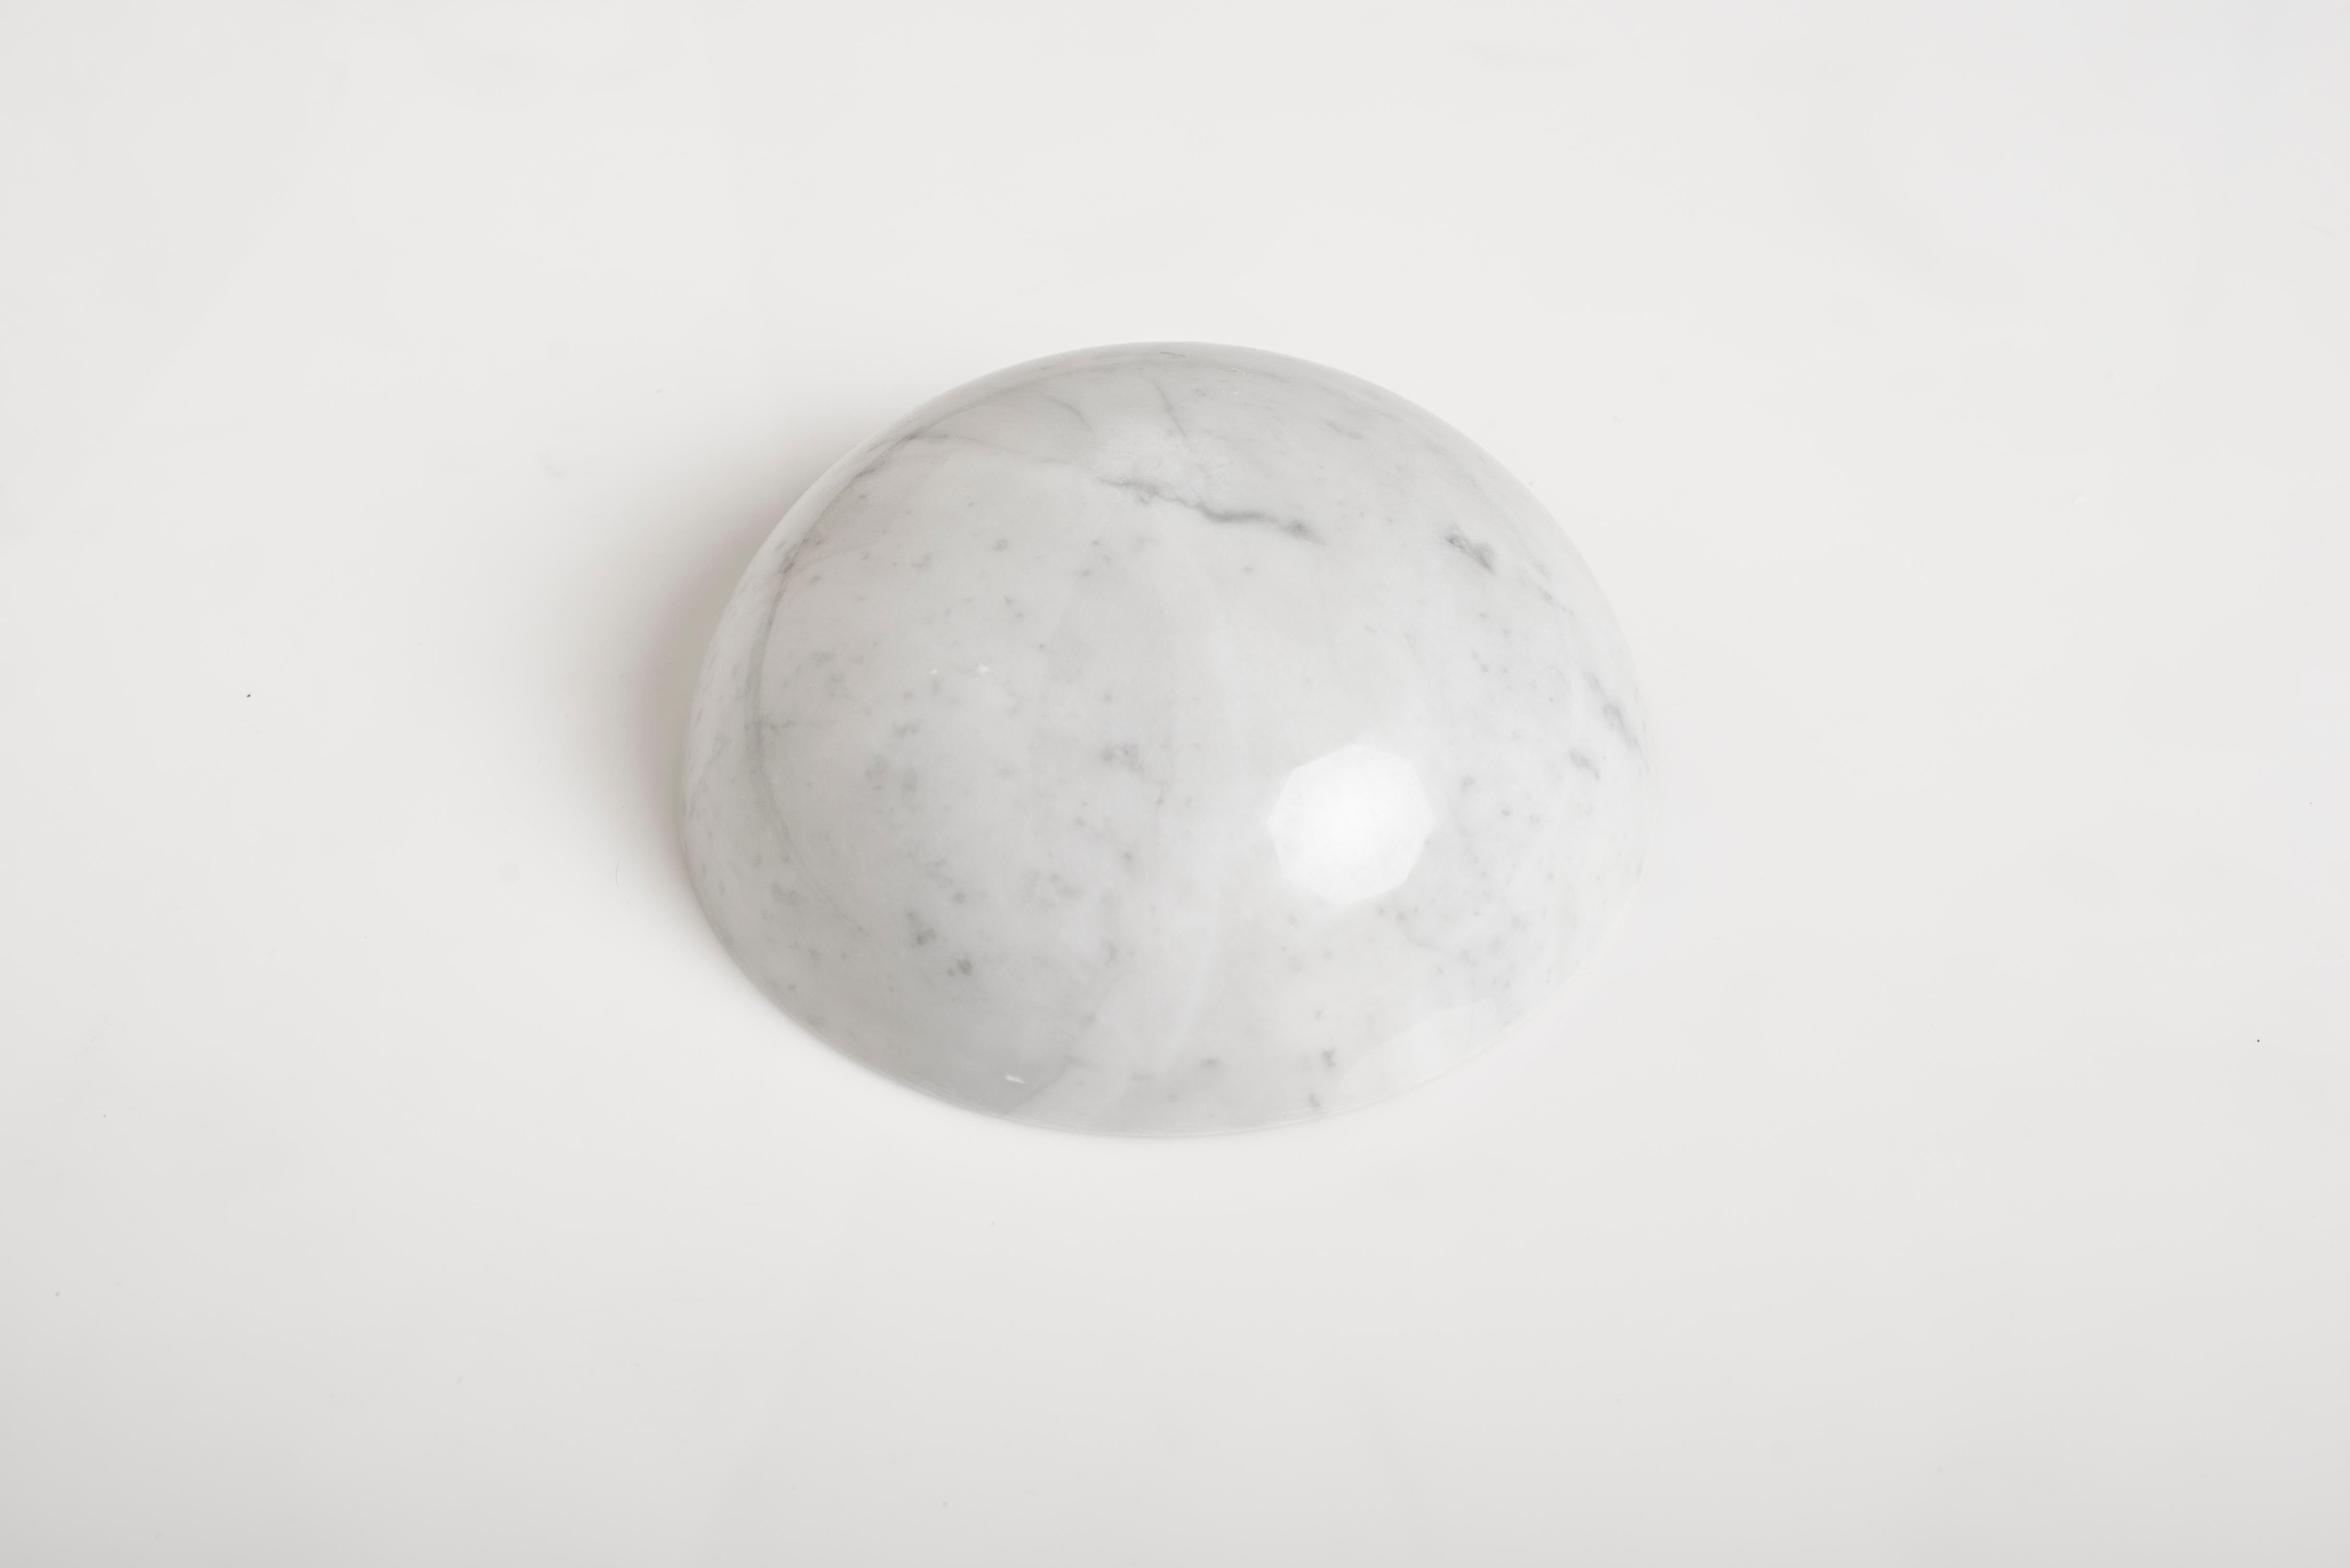 Abu Dhabi sculpture by Carlo Massoud
Handmade 
Dimensions: D 22 x H 15 cm 
Materials: carrara marble

Carlo Massoud’s work stems from his relentless questioning of social, political, cultural, and environmental norms. He often pushes his